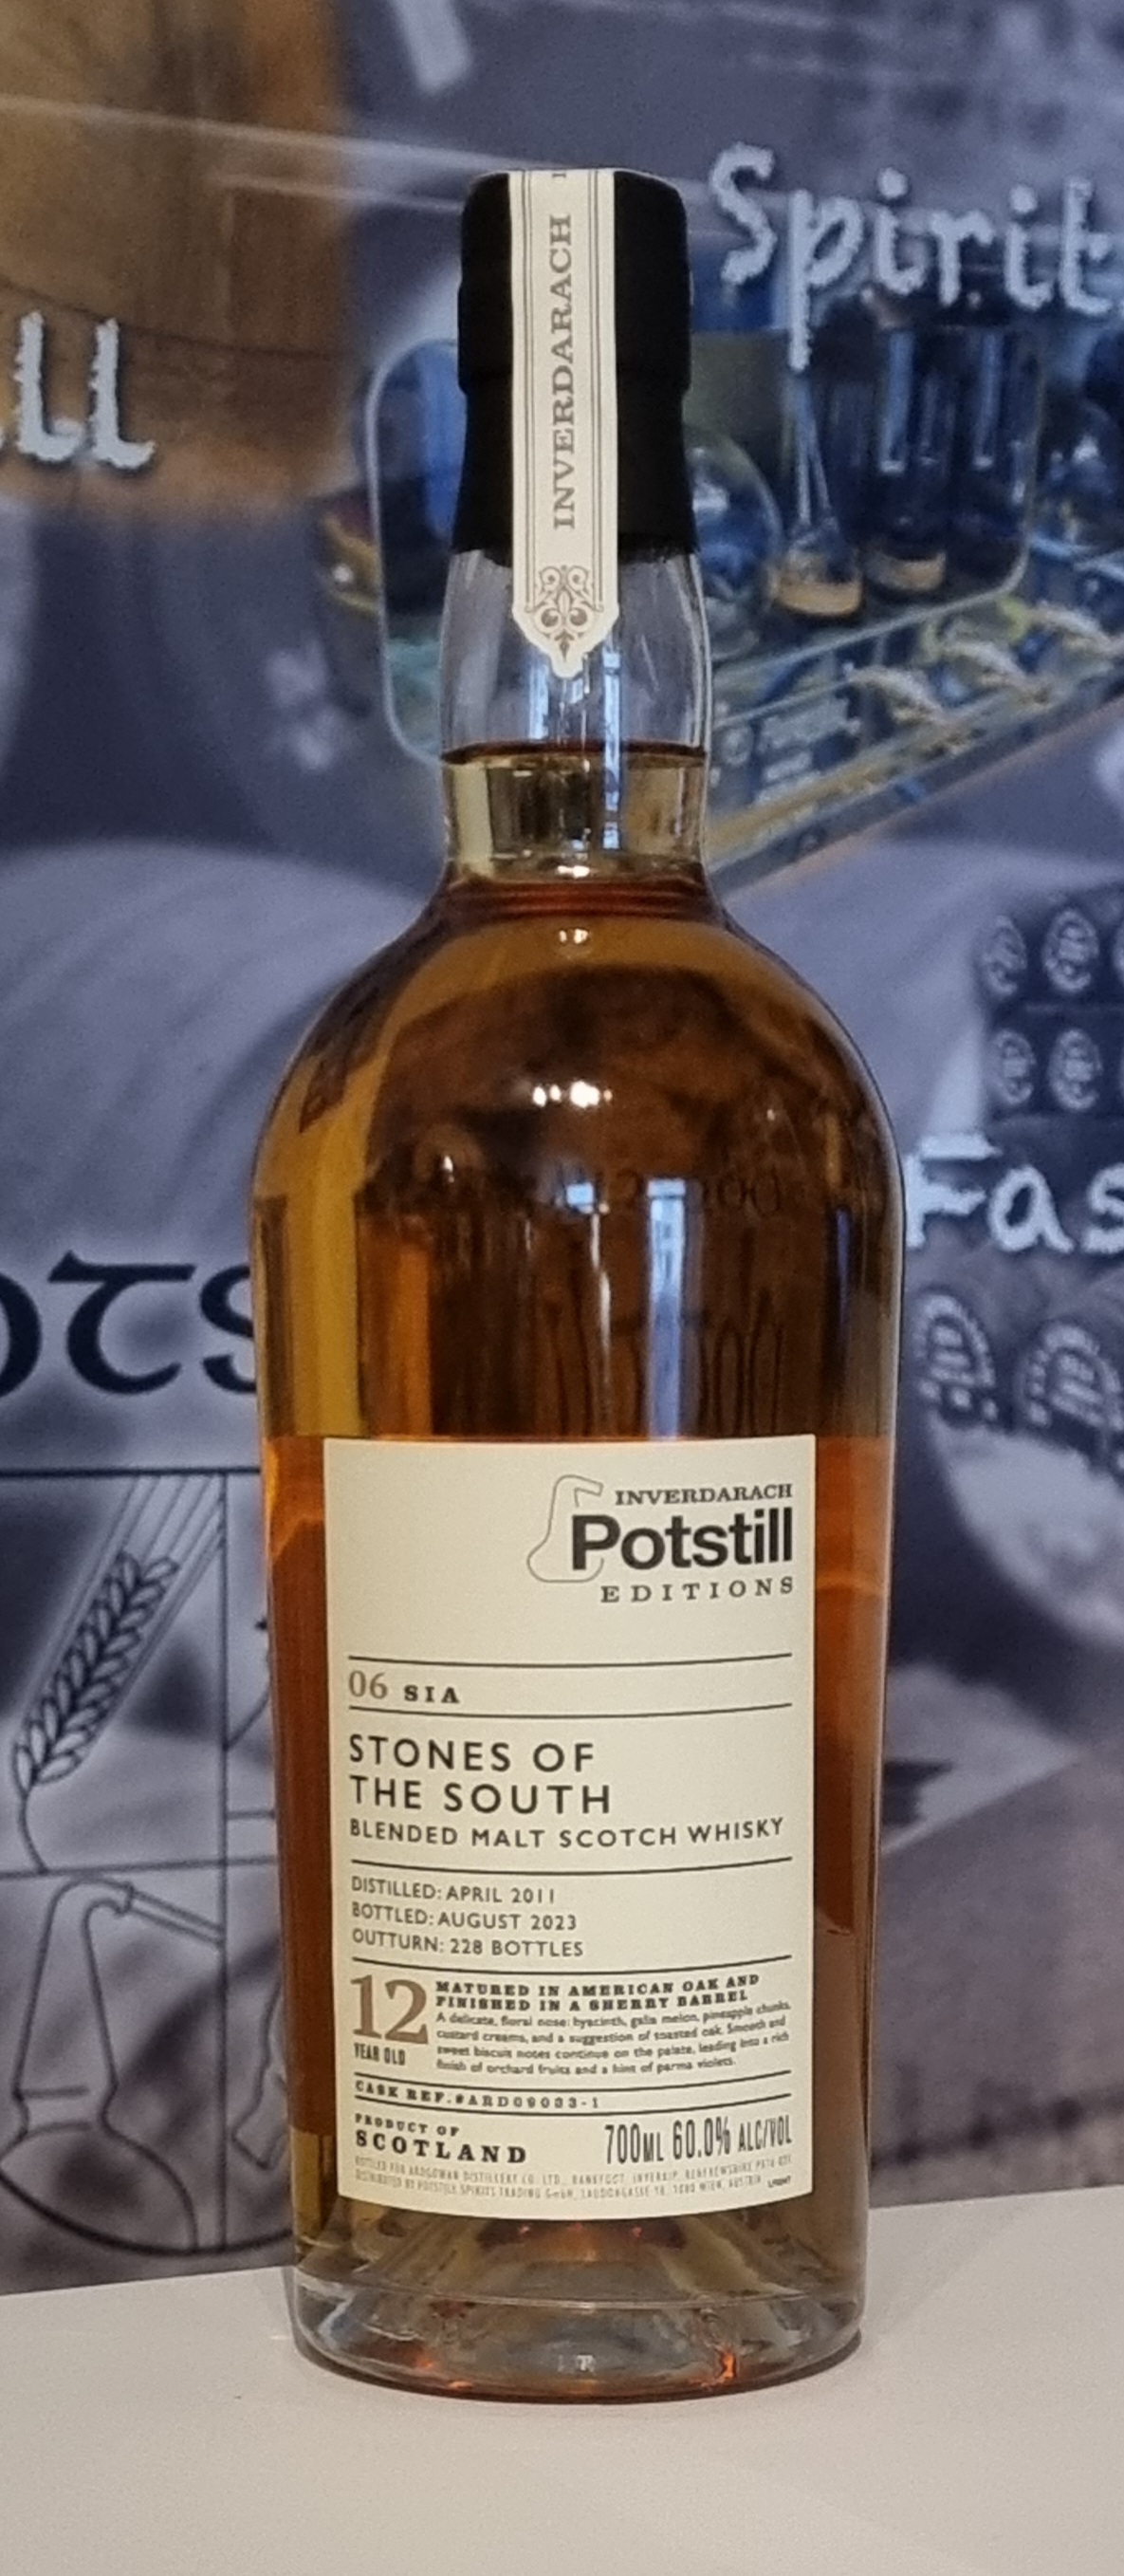 Stone of the South Potstill Edition